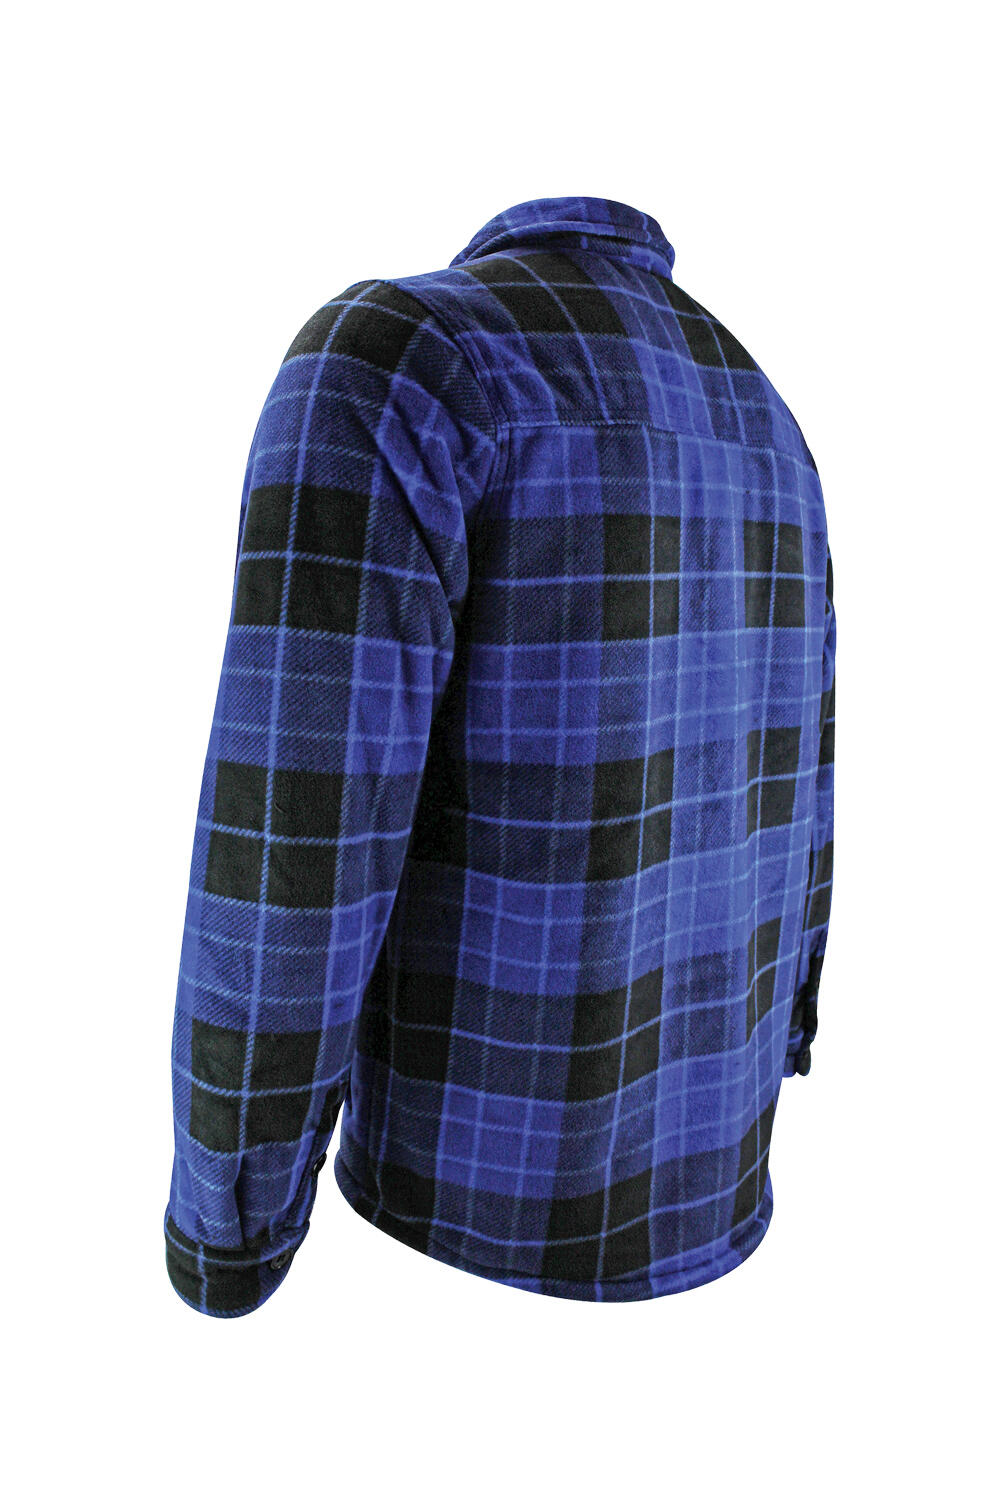 Mens Quilted Plaid Pattern Thermal Warm Long Sleeve Winter Jacket 4/4